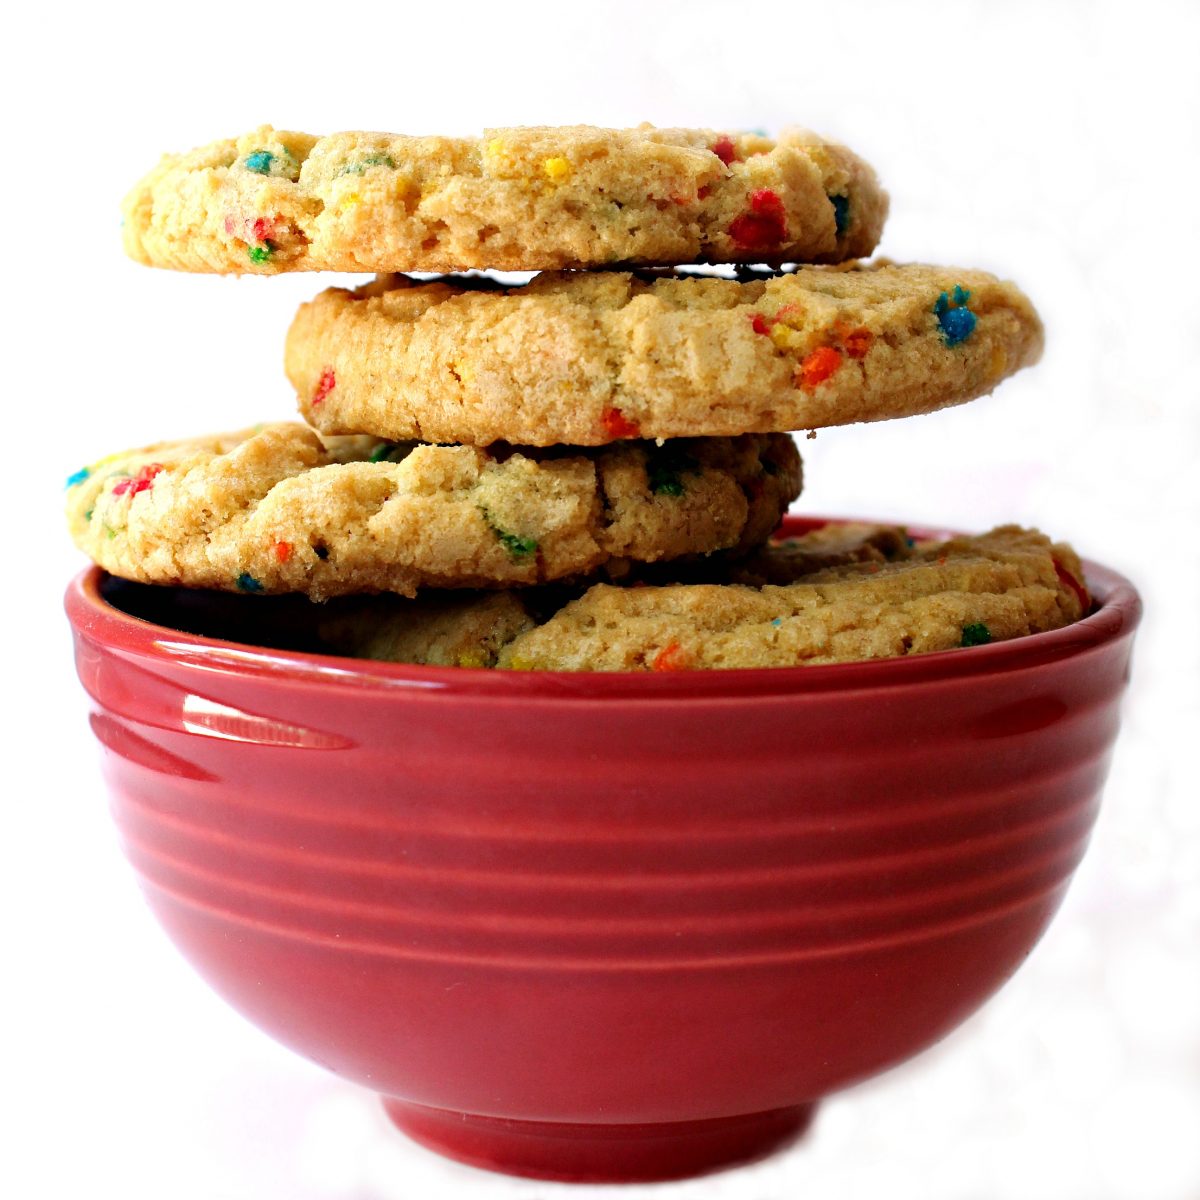 Side view of stack of cookies in a red bowl showing the thick, rounded edges of the cookies.